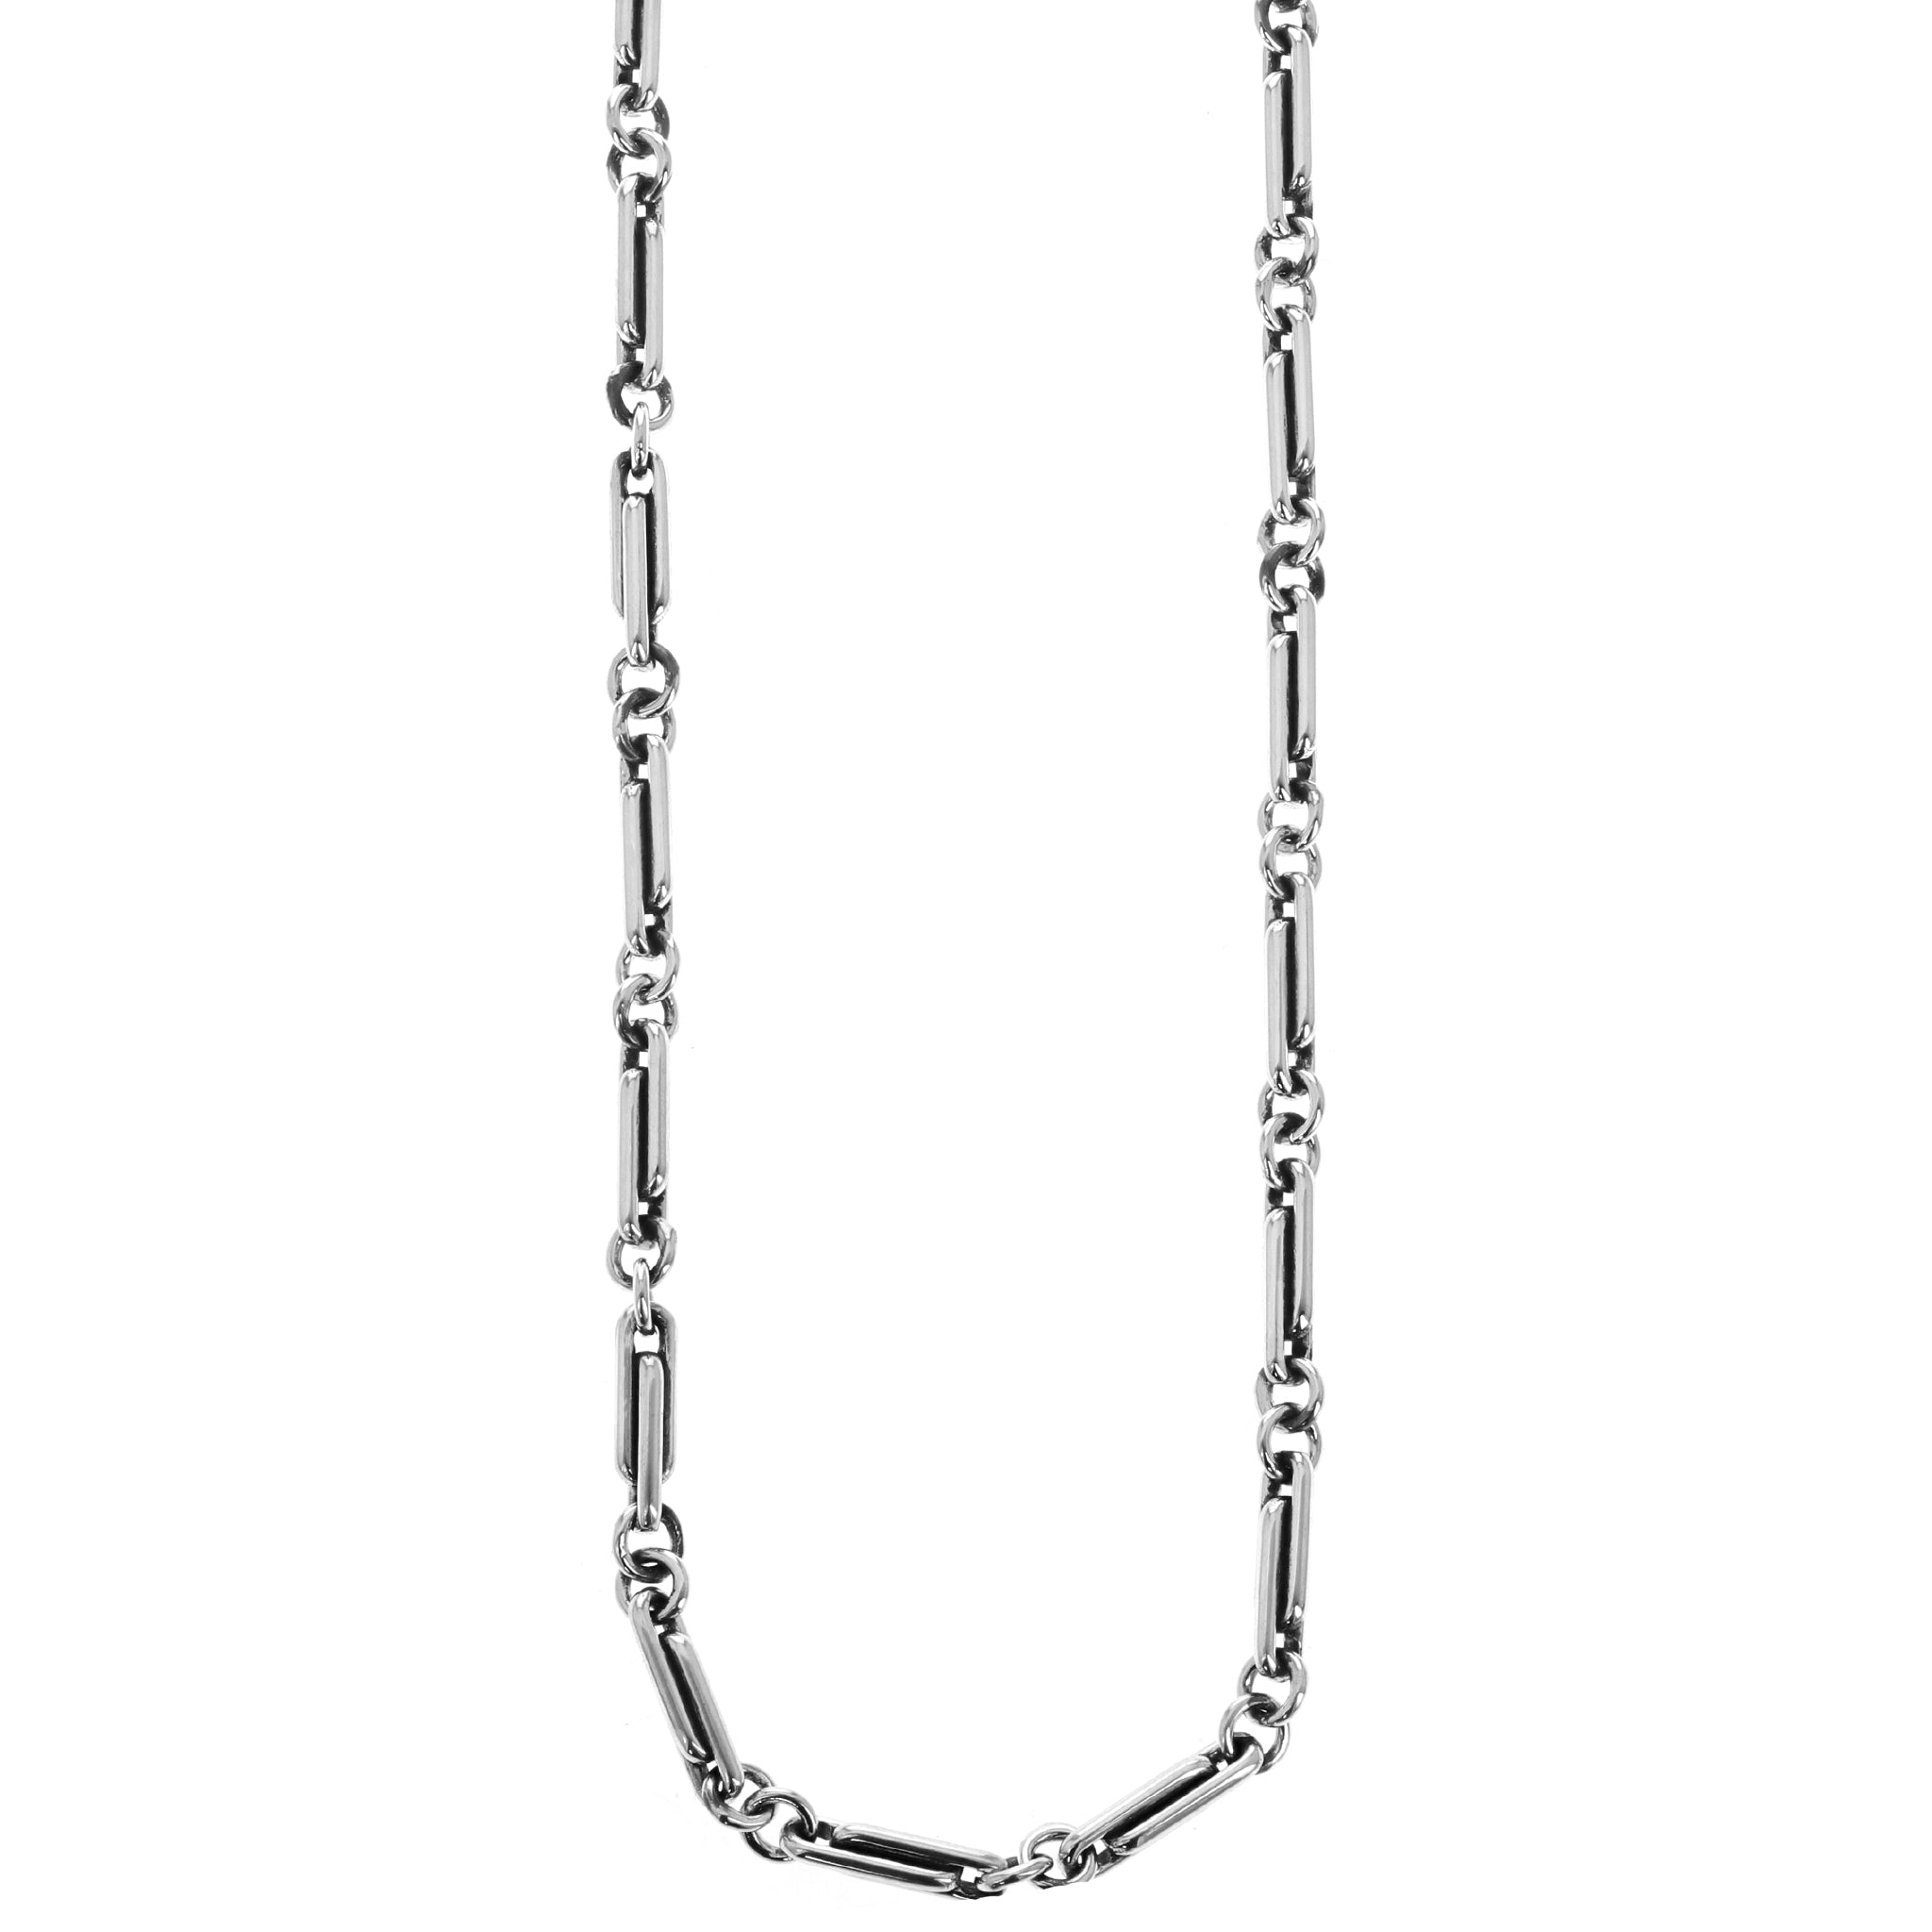 SMALL PAPERCLIP NECKLACE WITH LOBSTER CLASP (24 IN. LENGTH)